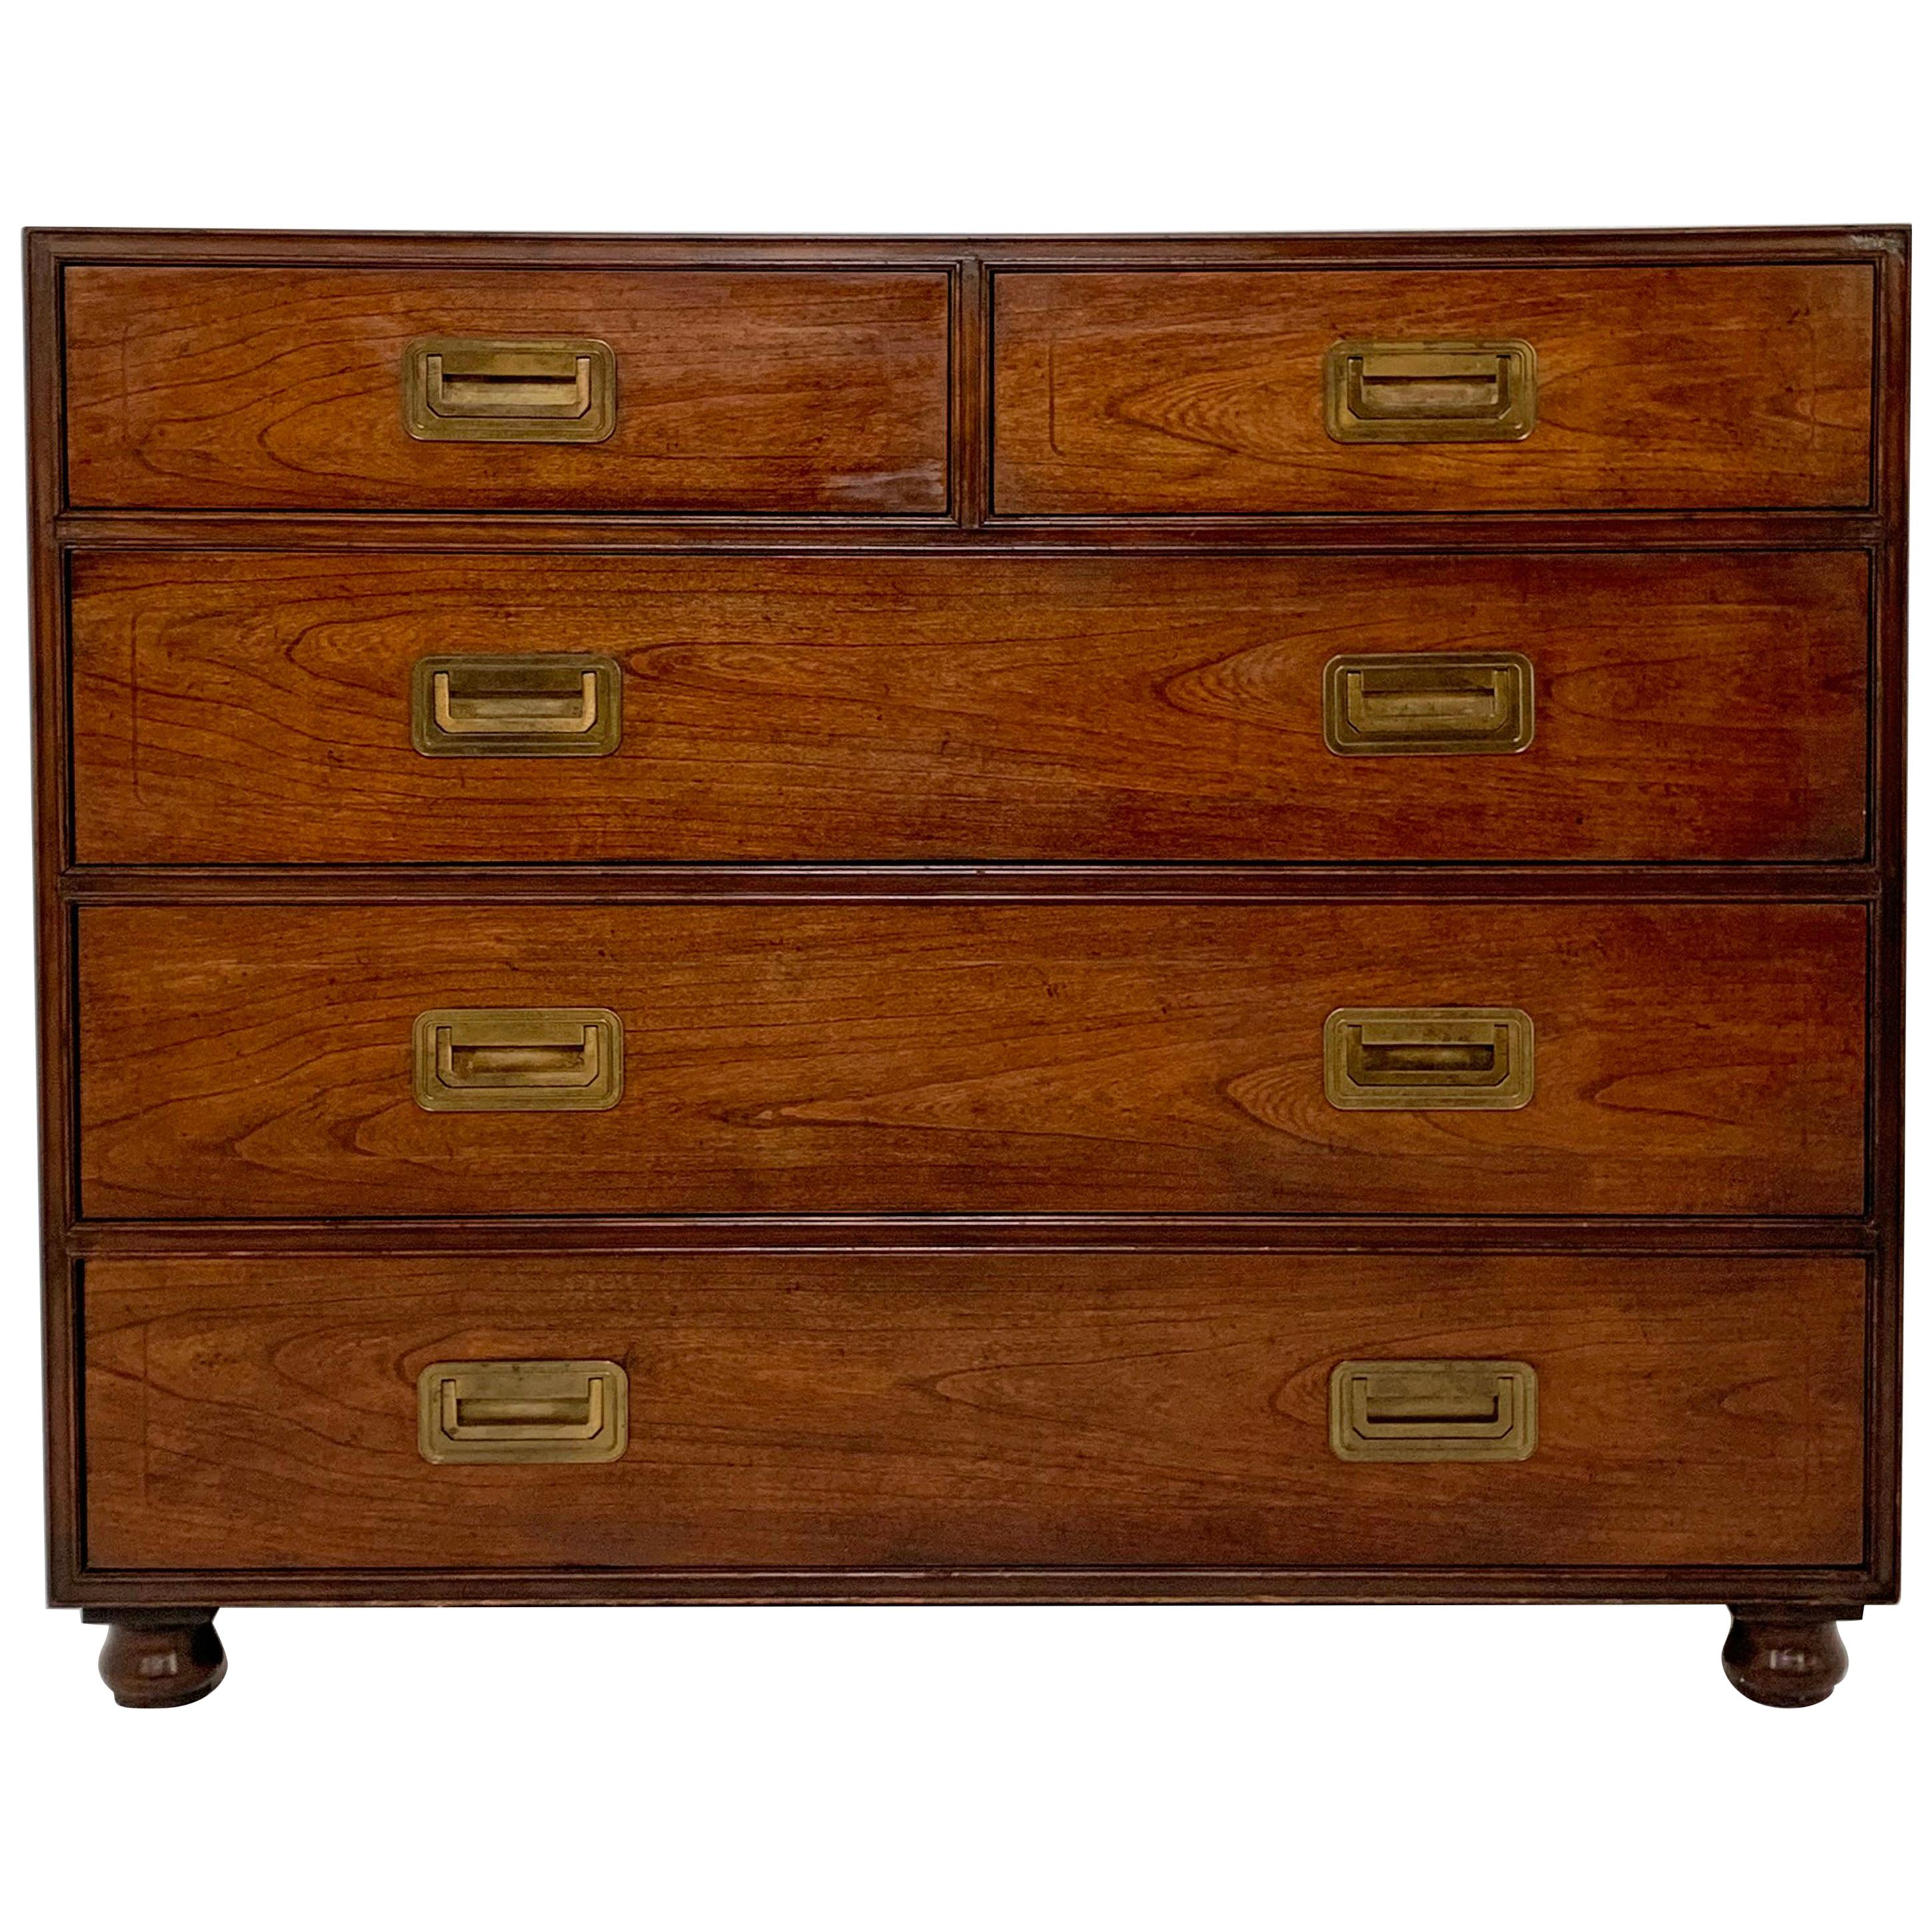 Baker Furniture Five-Drawer Campaign Chest, circa 1940s